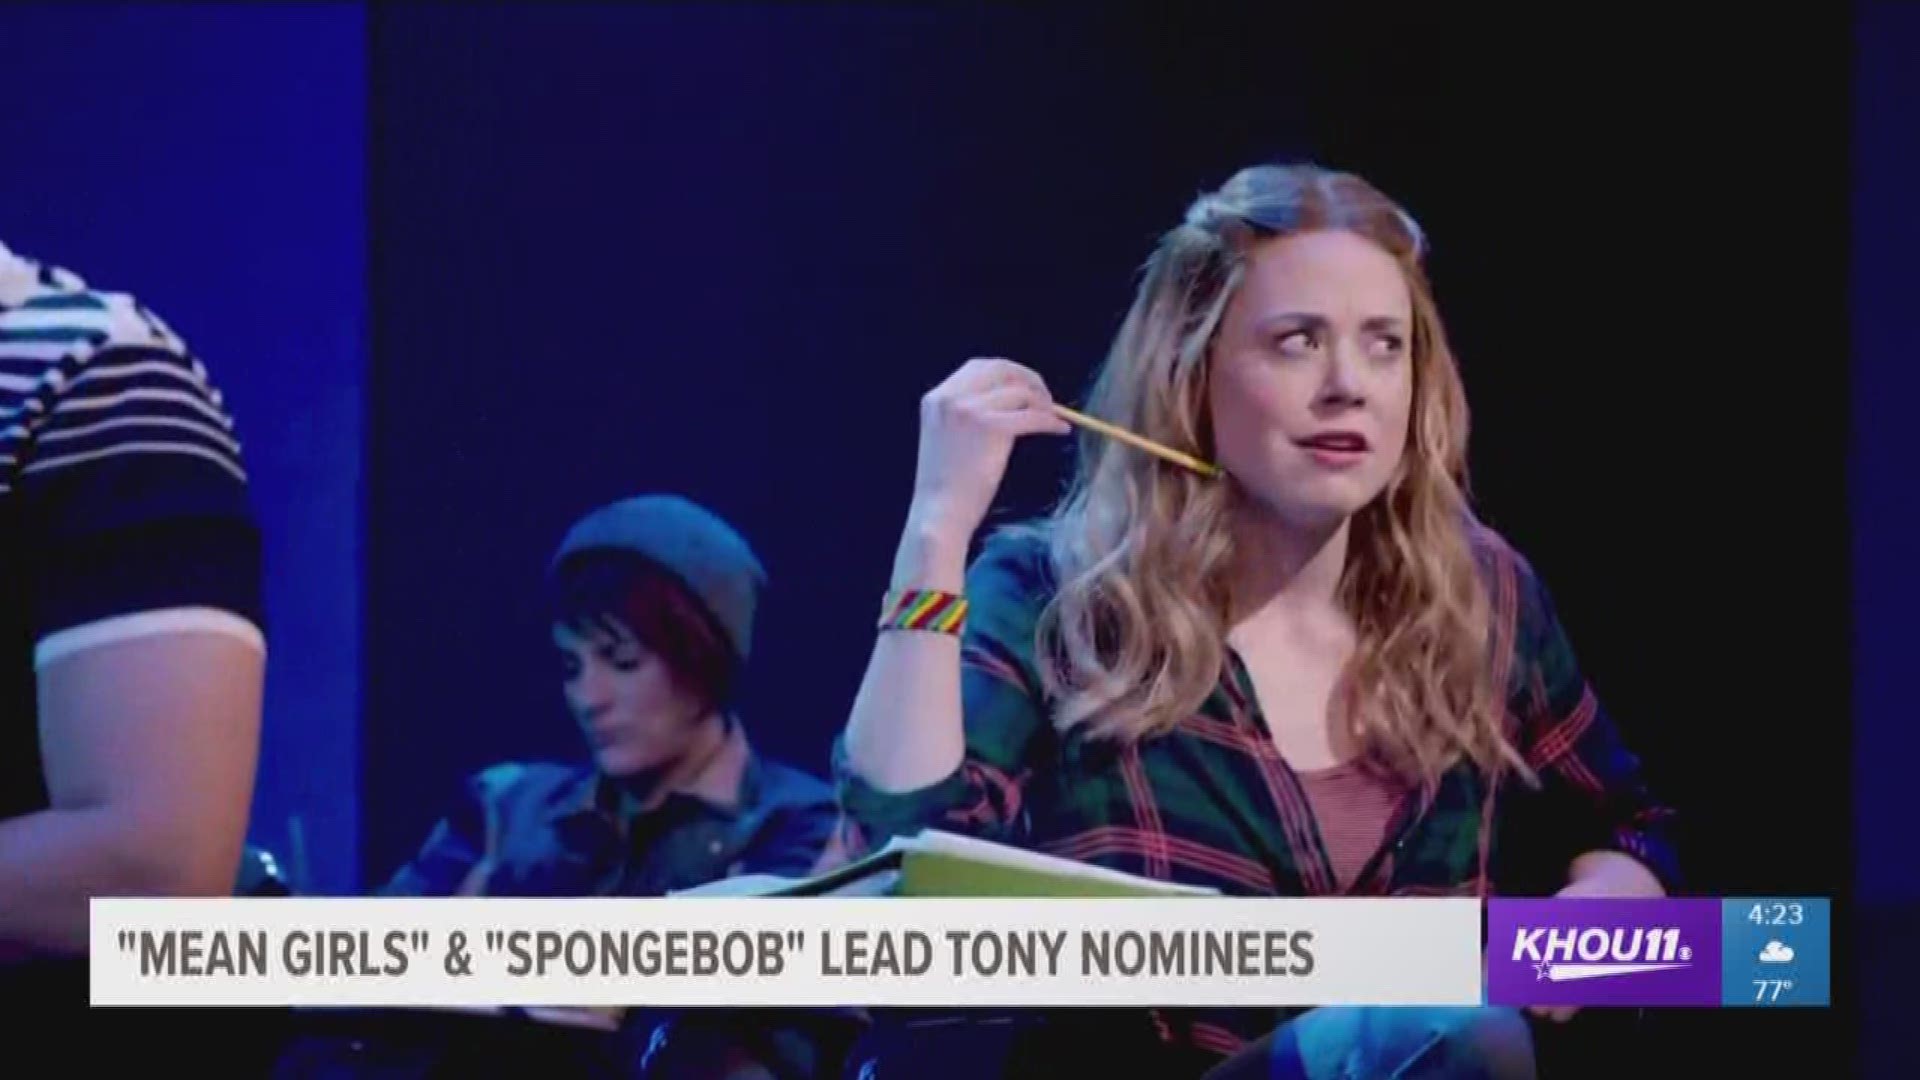 "Mean Girls" and "SpongeBob Squarepants" both have been nominated for 12 Tony awards. They are in the running for Best Musical. 